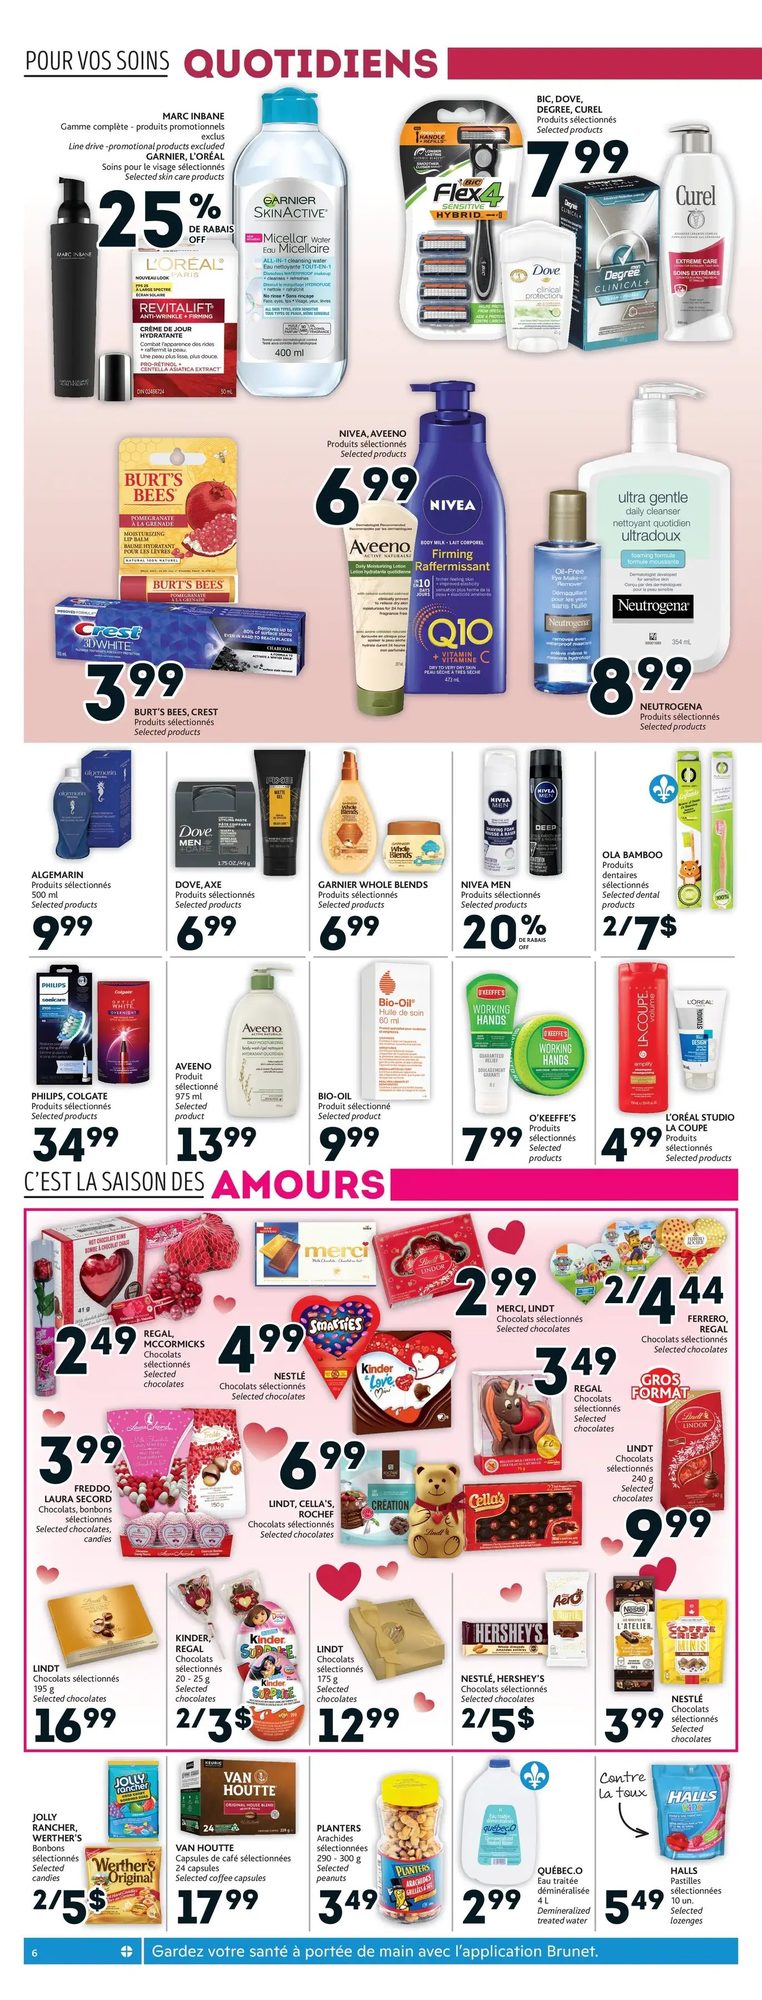 Brunet - Weekly Flyer Specials - Page 6